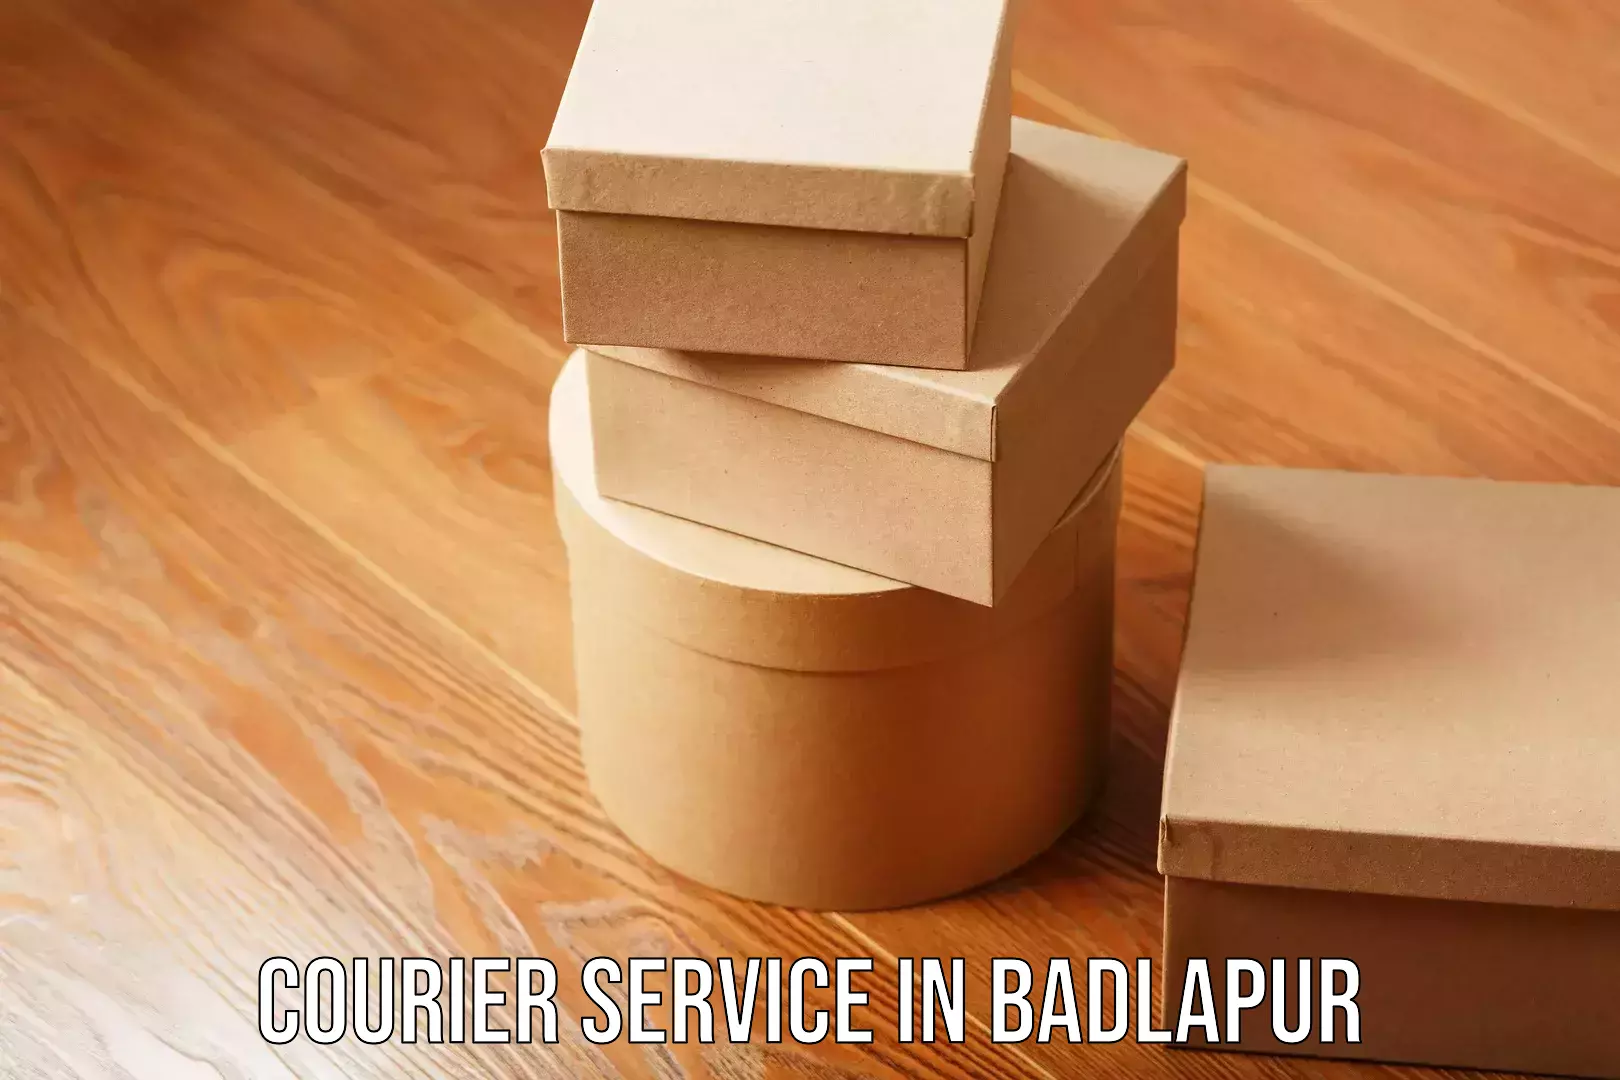 Parcel handling and care in Badlapur